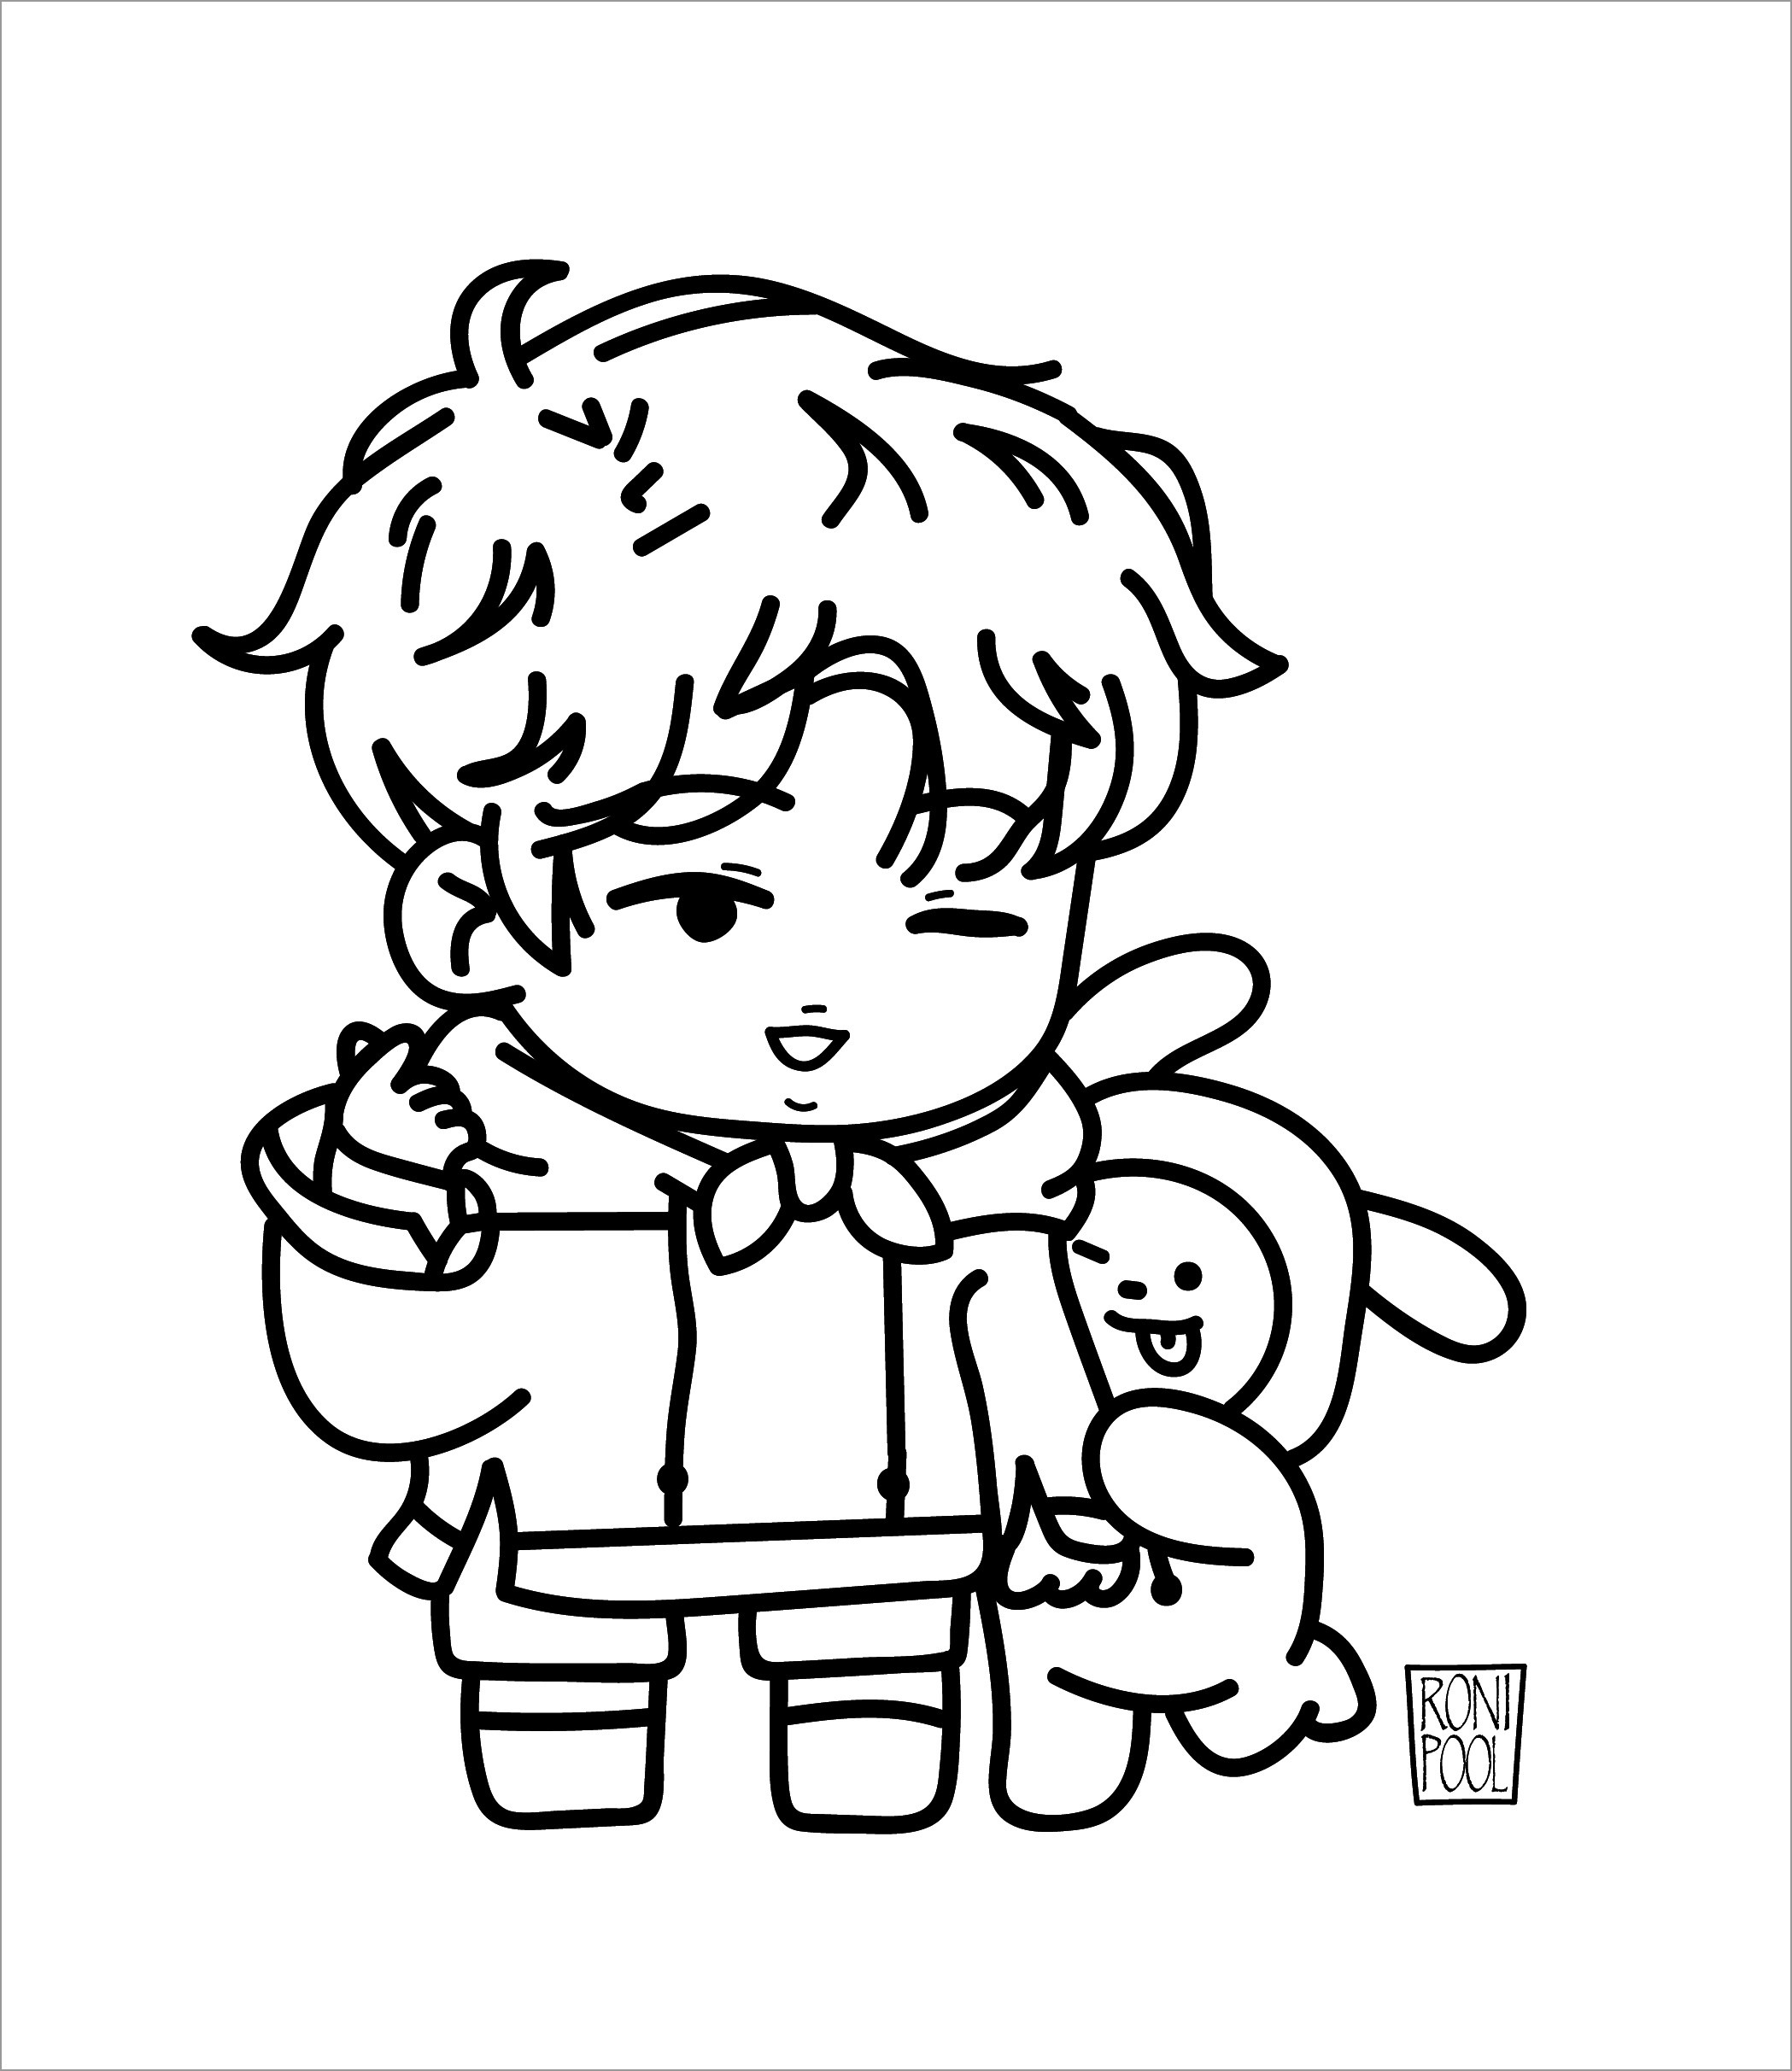 Bts Fanart Bt21 Chimmy And Jimin Chibi Coloring Page Coloringbay